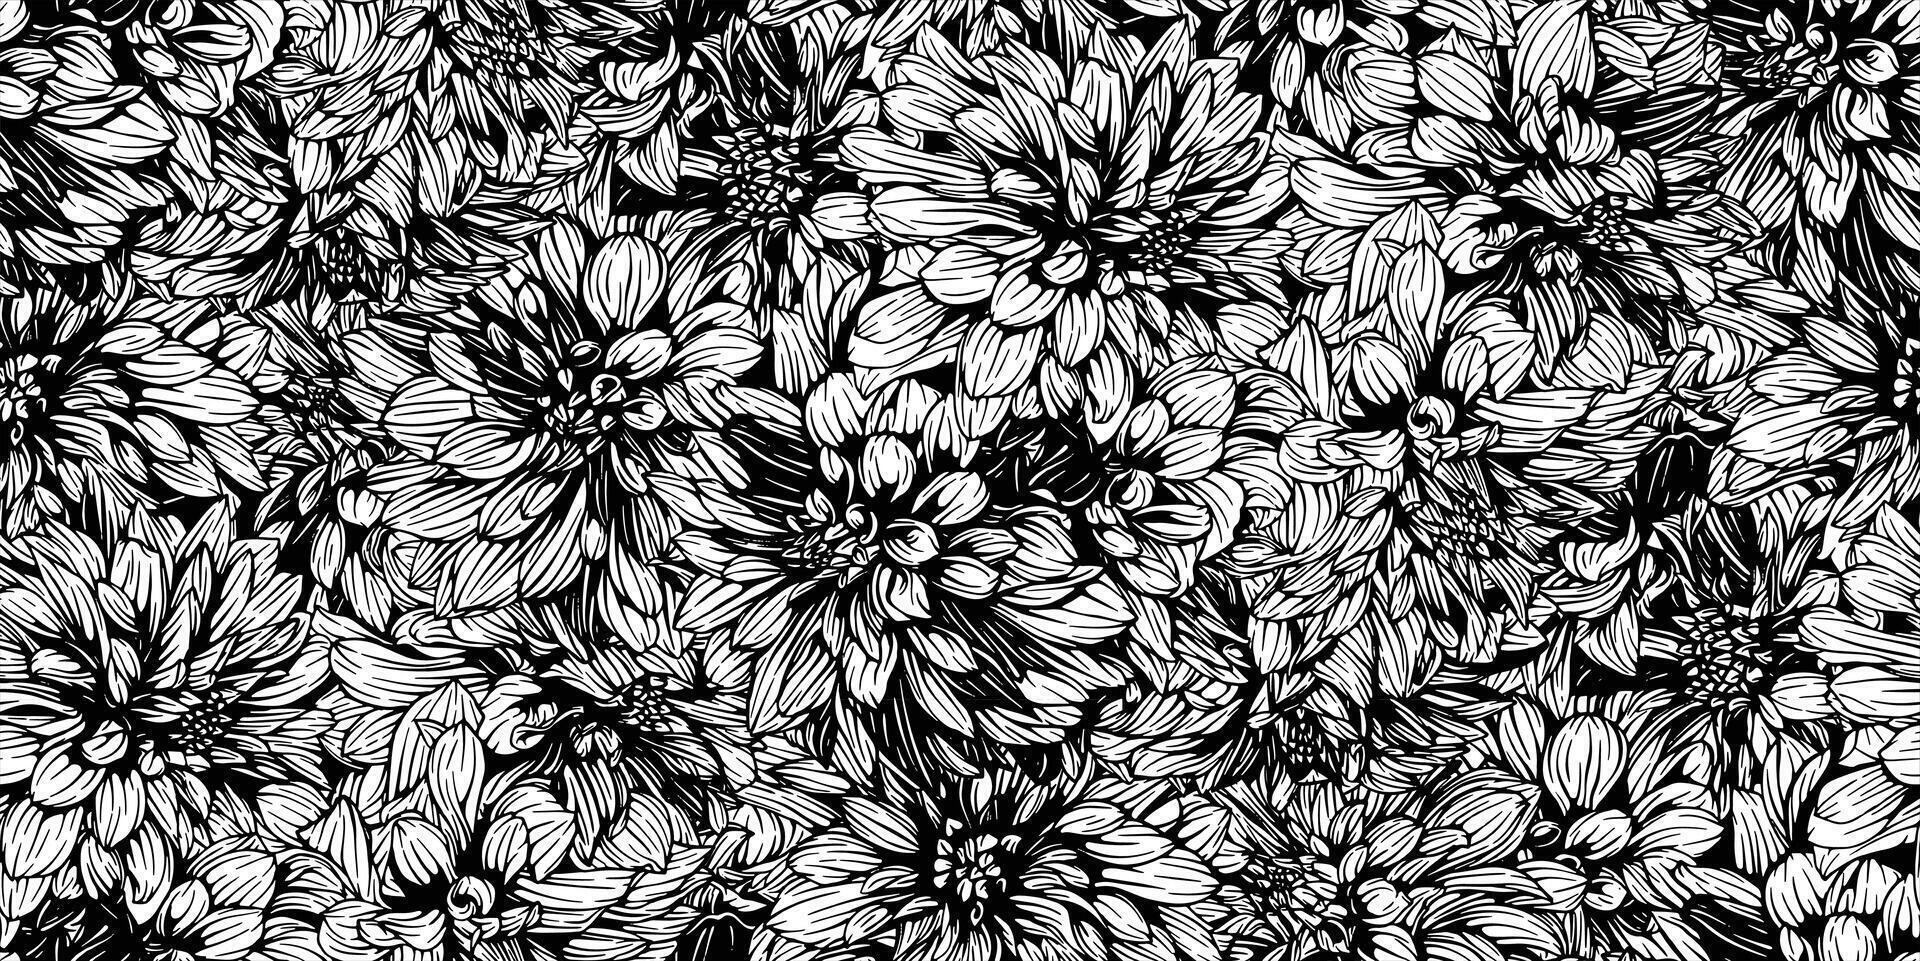 Seamless pattern with hand drawn dahlia night silence flowers floral illustration vector